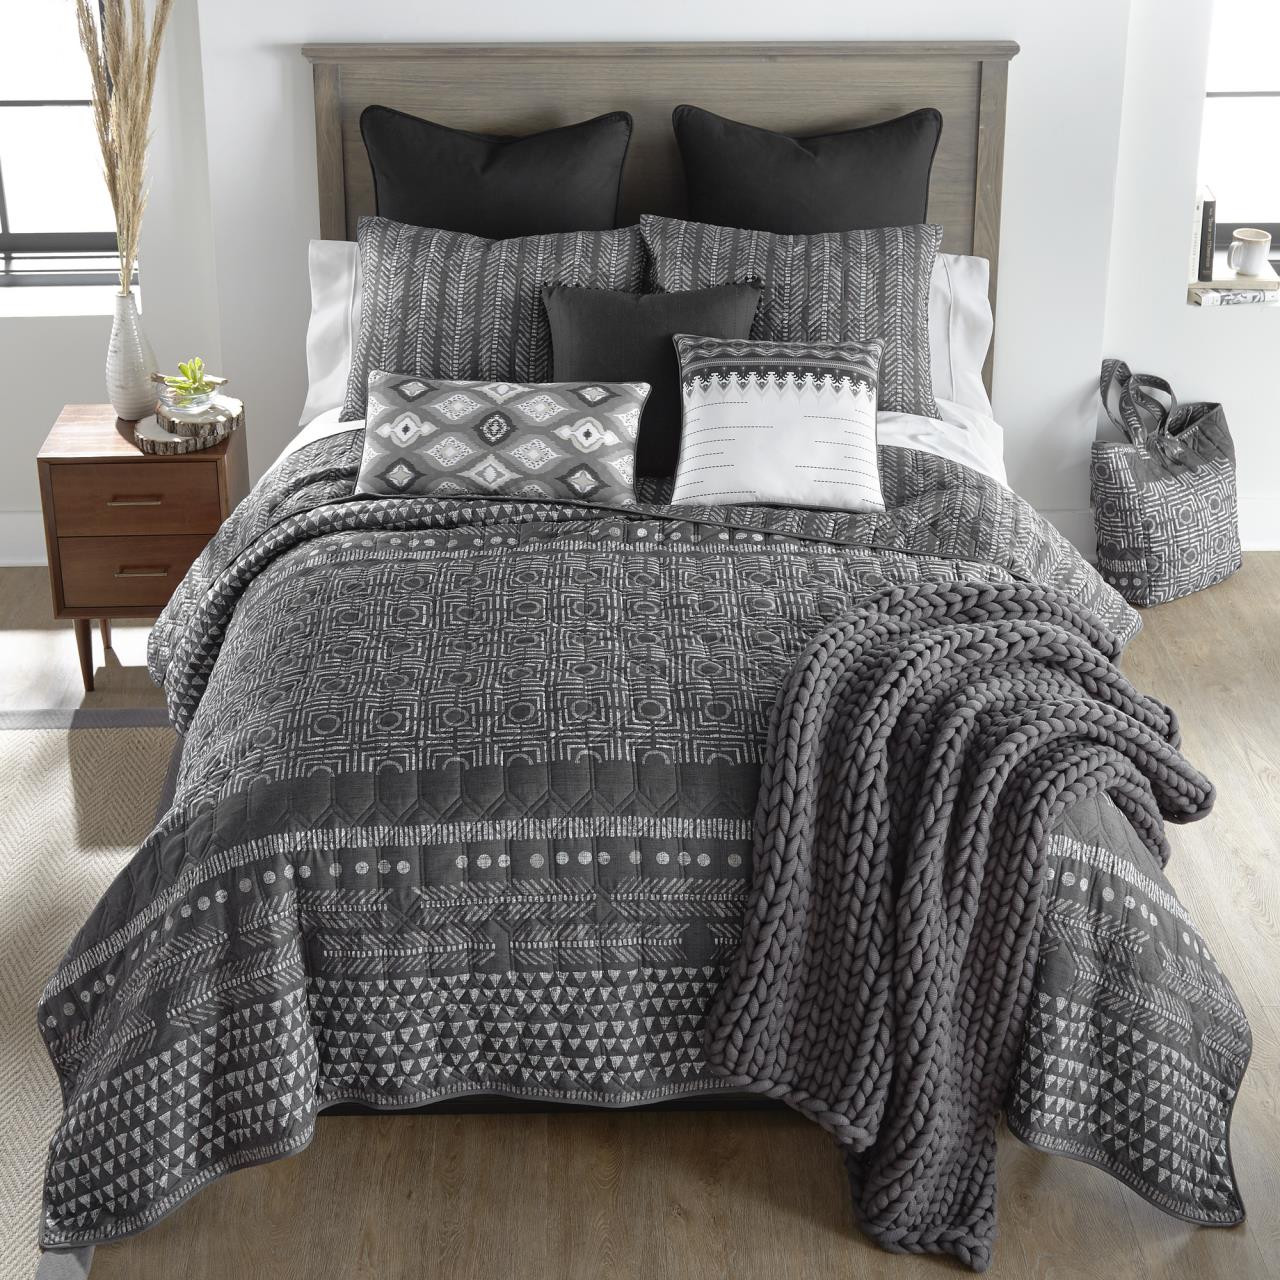 Nomad Bedding Collection -